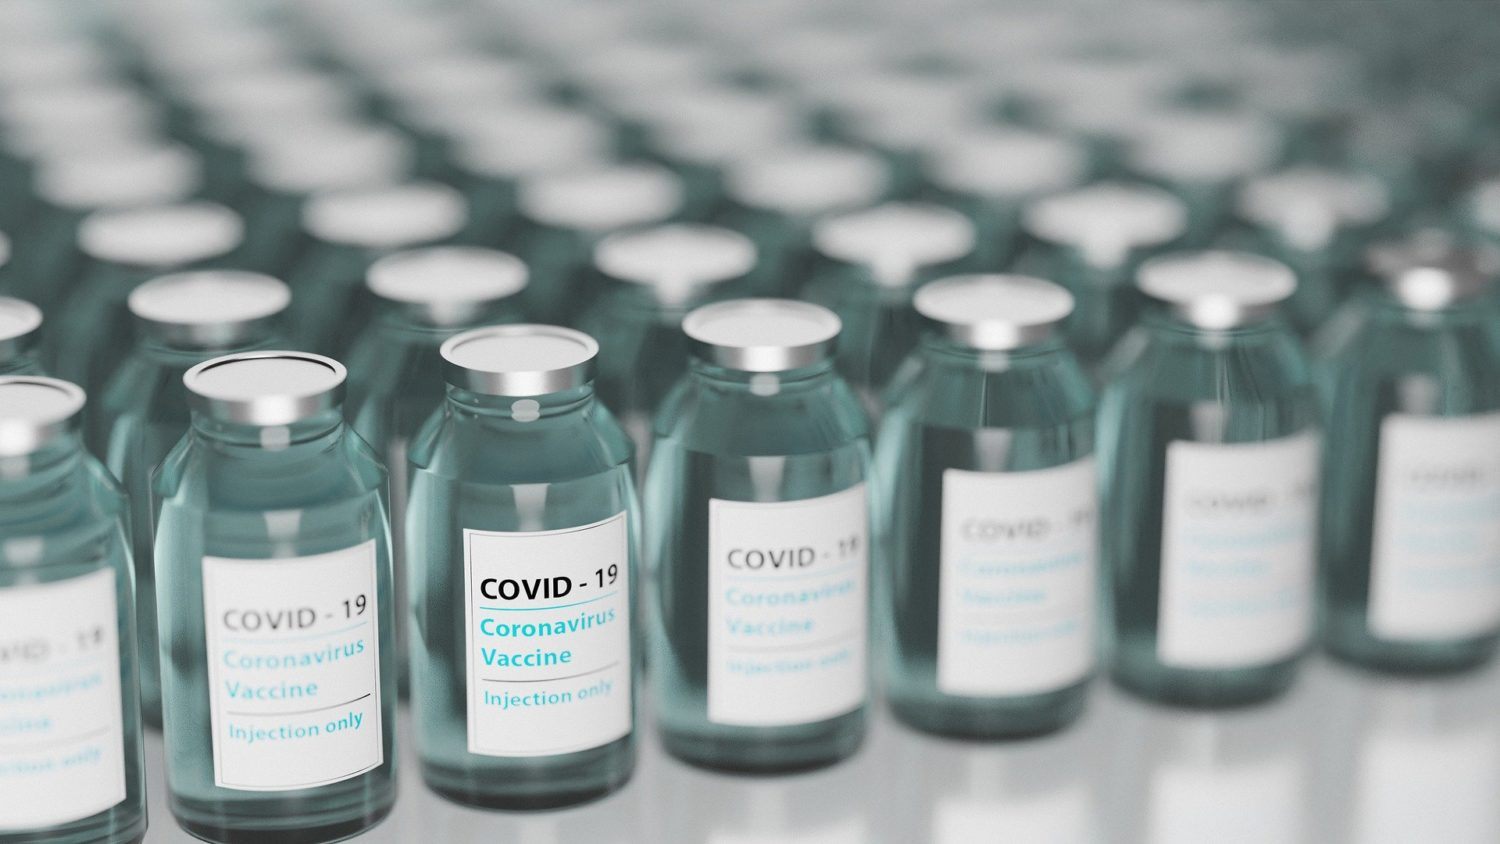 87% of Americans Want to Receive COVID-19 Vaccine Information From Their Providers